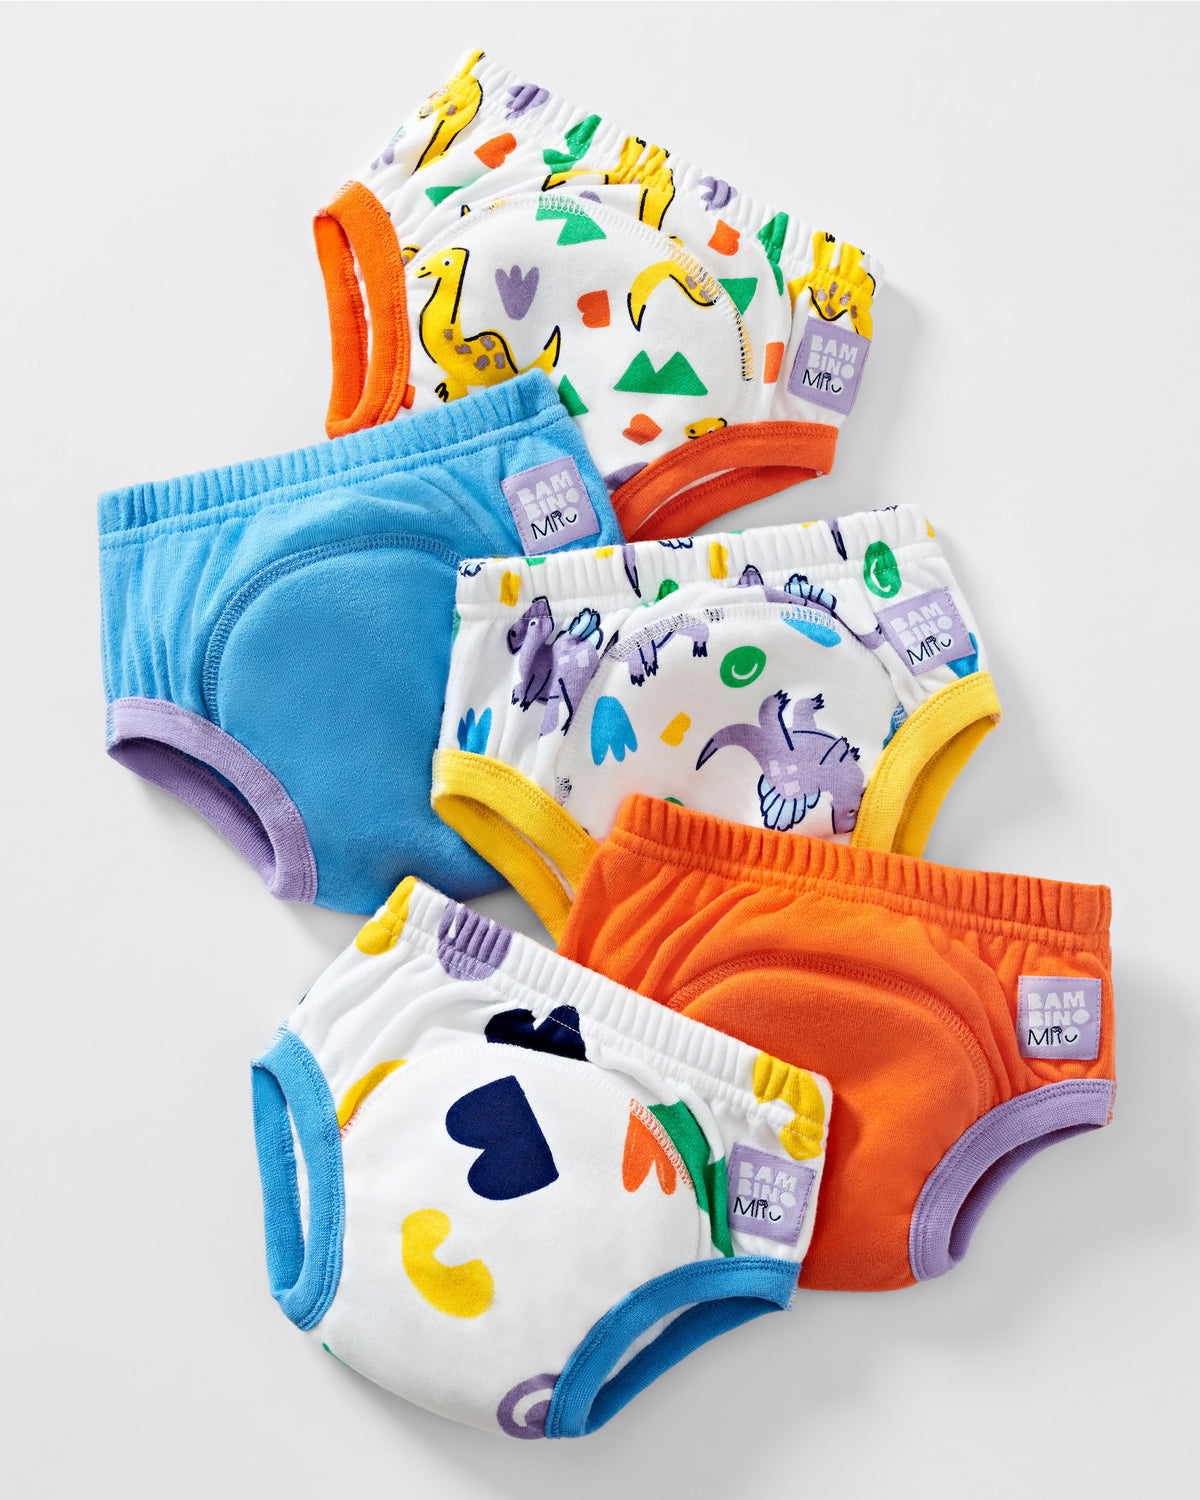  Bambino mio, Potty training underwear for girls and boys, 18-24  months : Baby